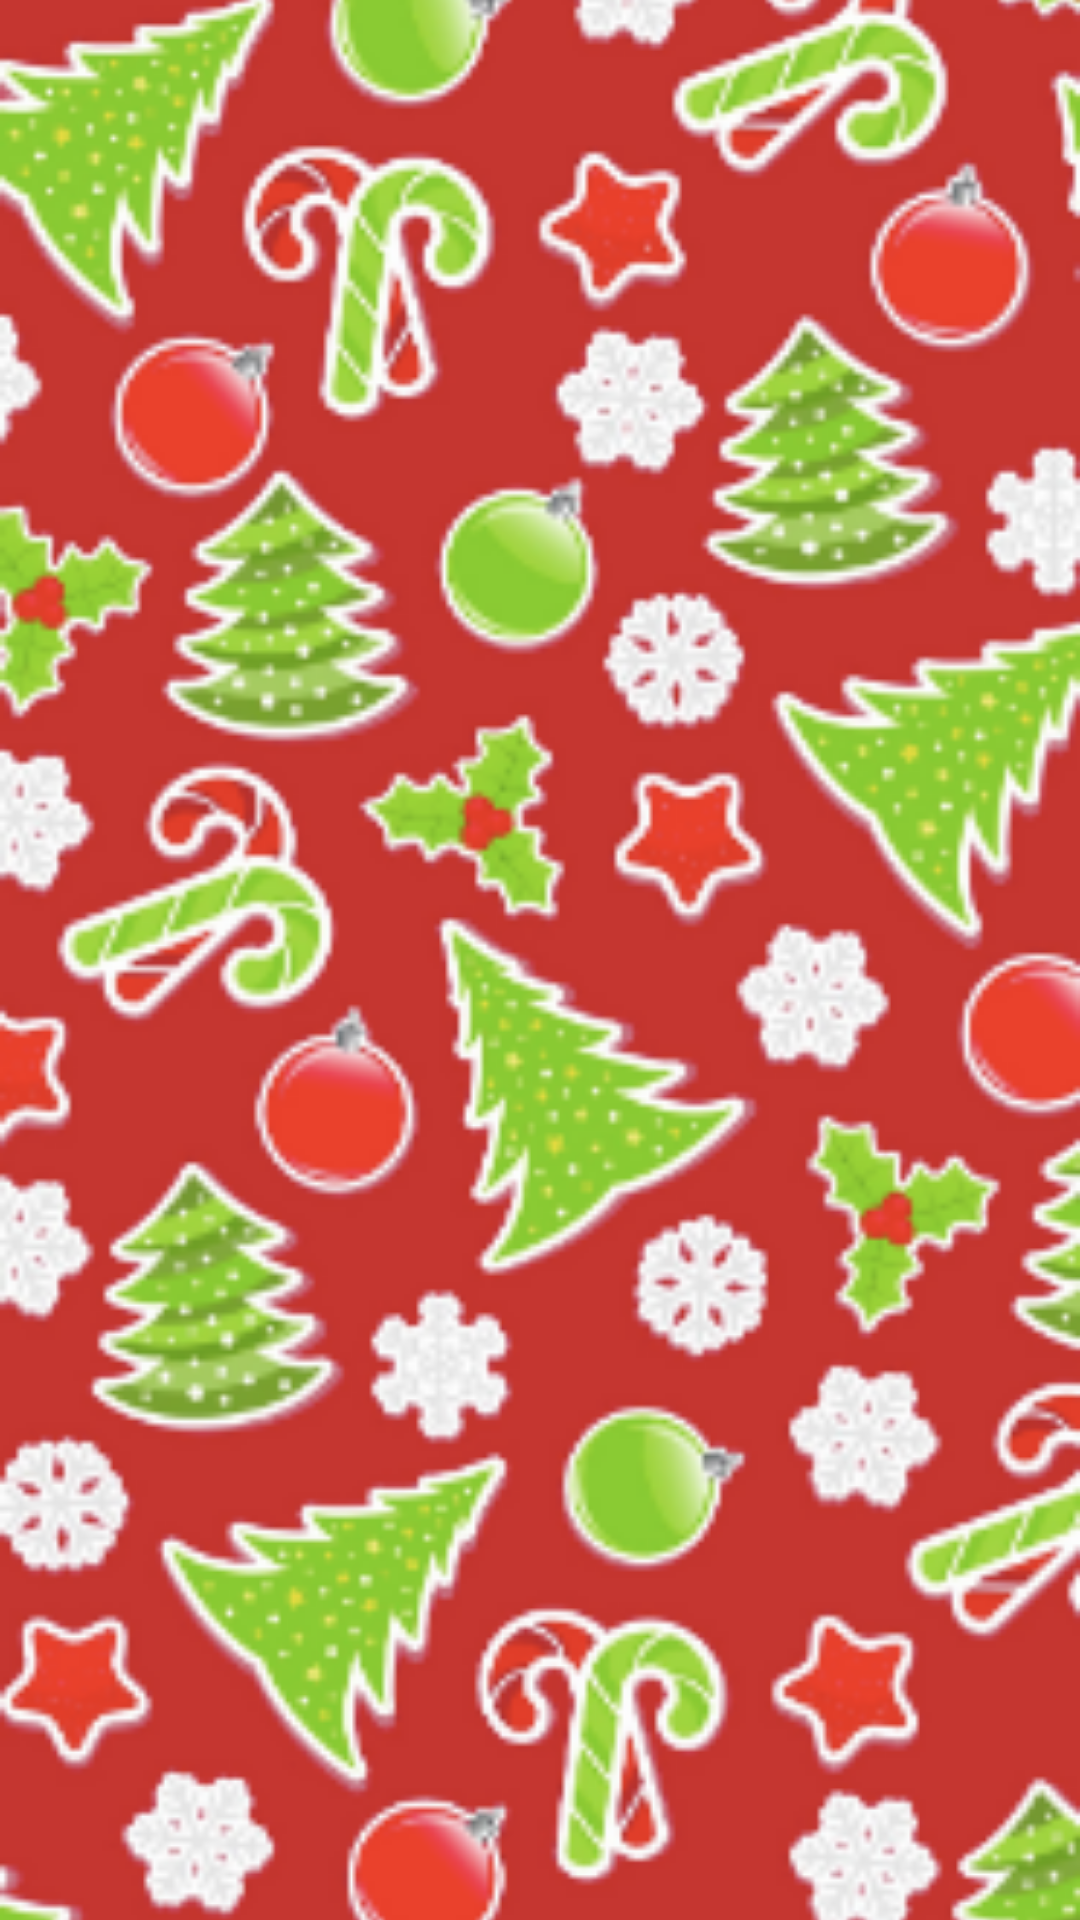 Christmas wallpaper for iphone